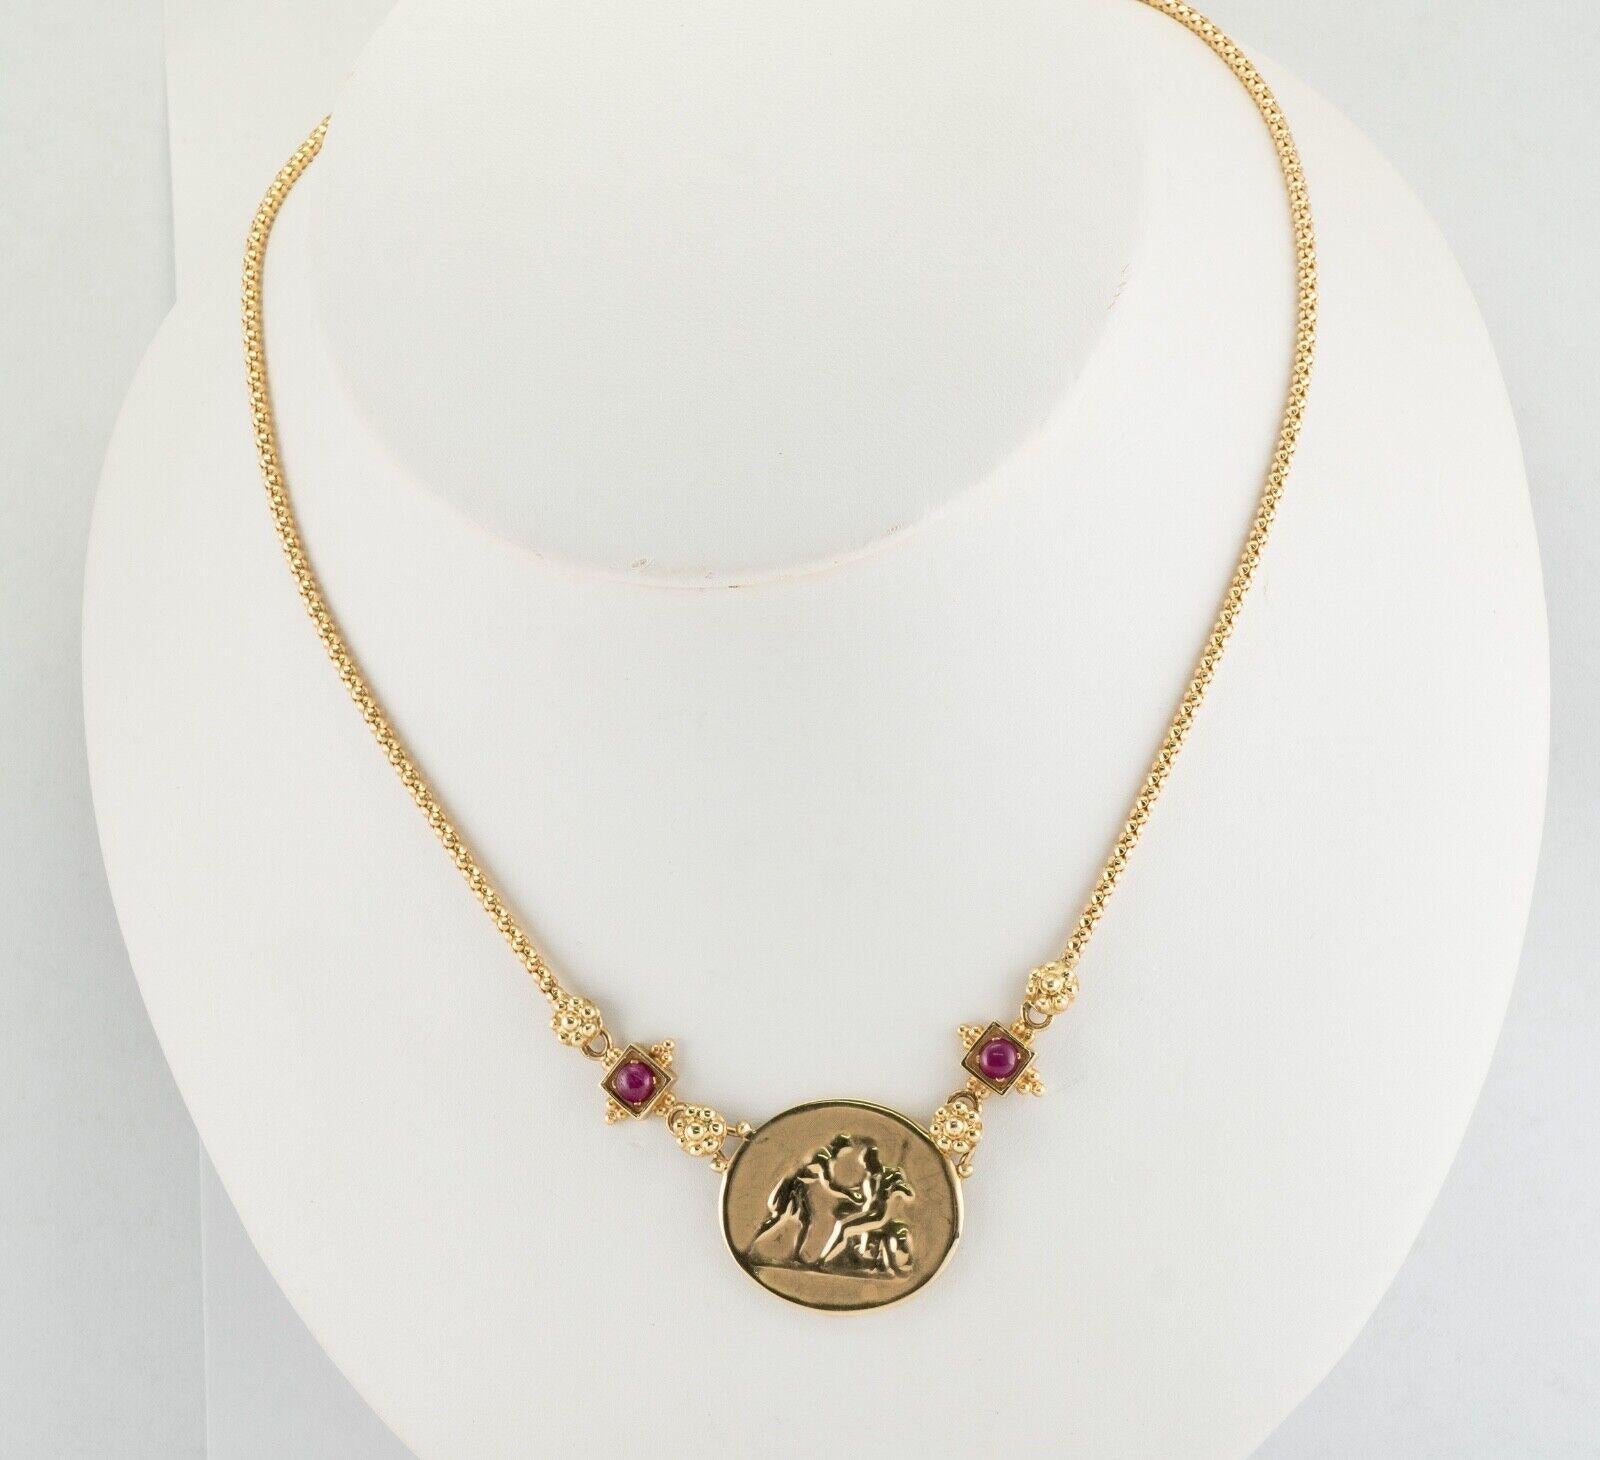 Ruby Intaglio Cameo Pendant Necklace 14K Gold

This gorgeous necklace is finely crafted by Italian jewelry maker in solid 14K Yellow Gold. The satin and polished centerpiece beautifully paints a scene of classic mythology. The center oval medallion